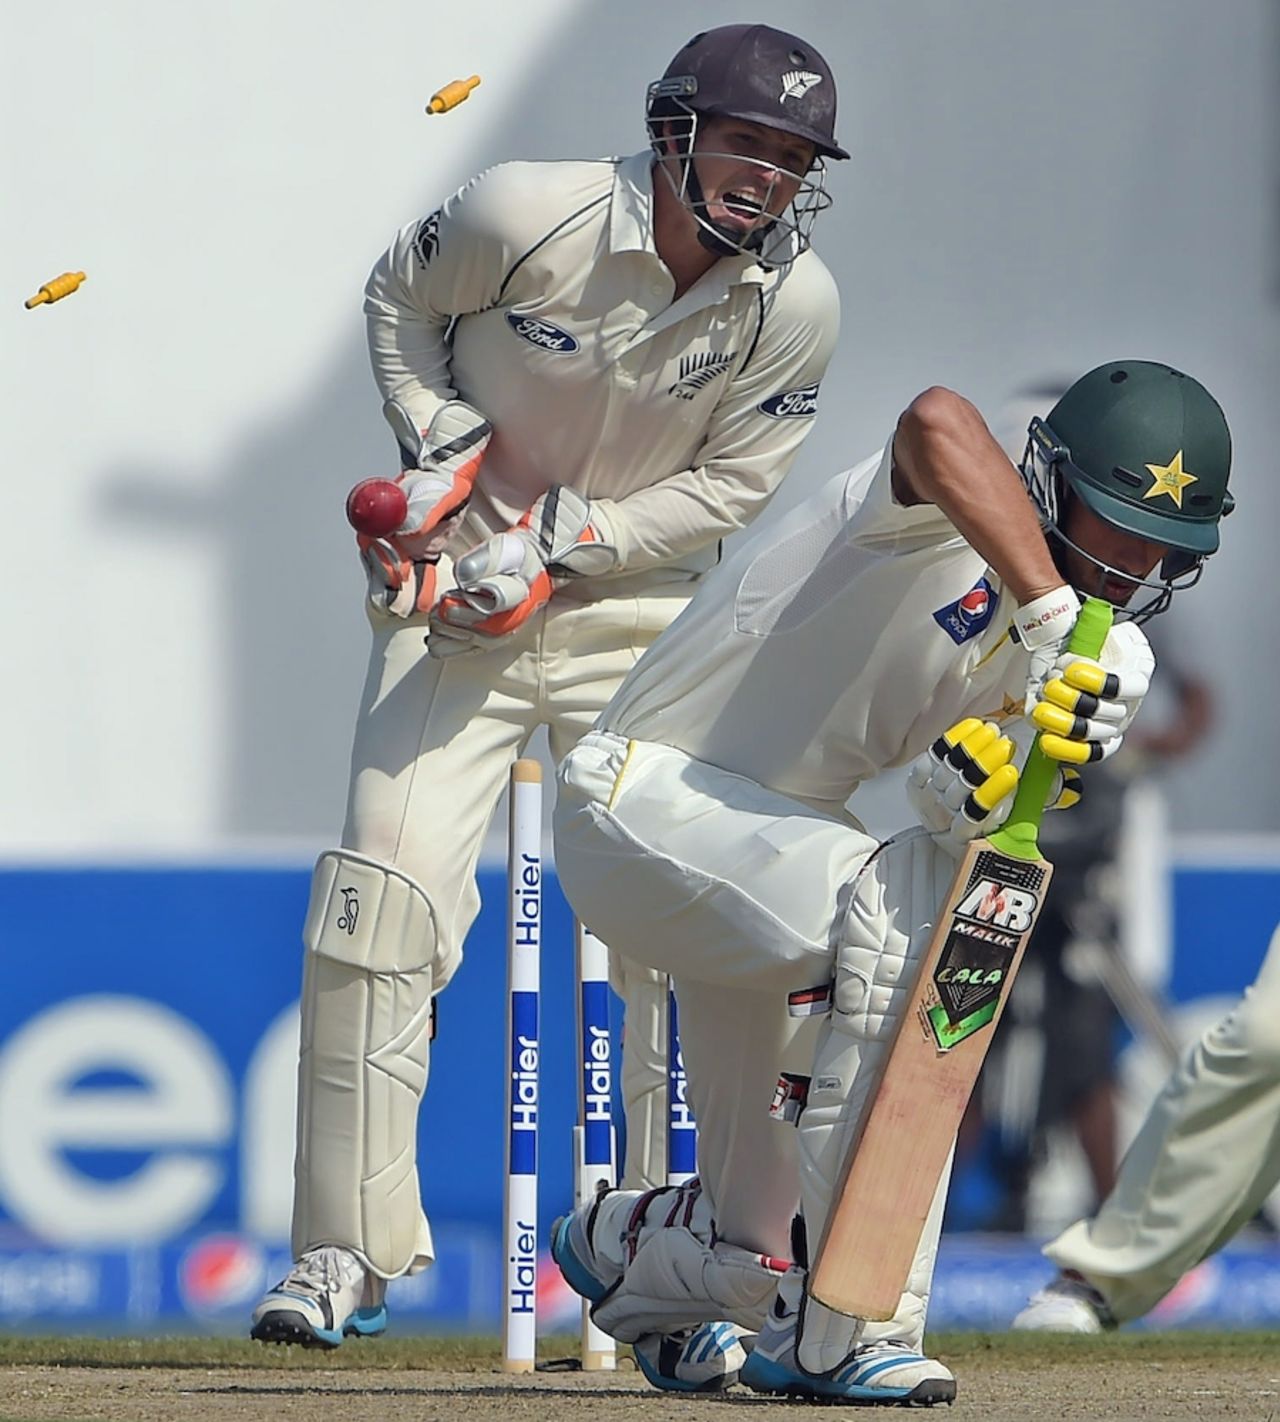 Shan Masood plays down the wrong line and is bowled, Pakistan v New Zealand, 3rd Test, Sharjah, 1st day, November 26, 2014